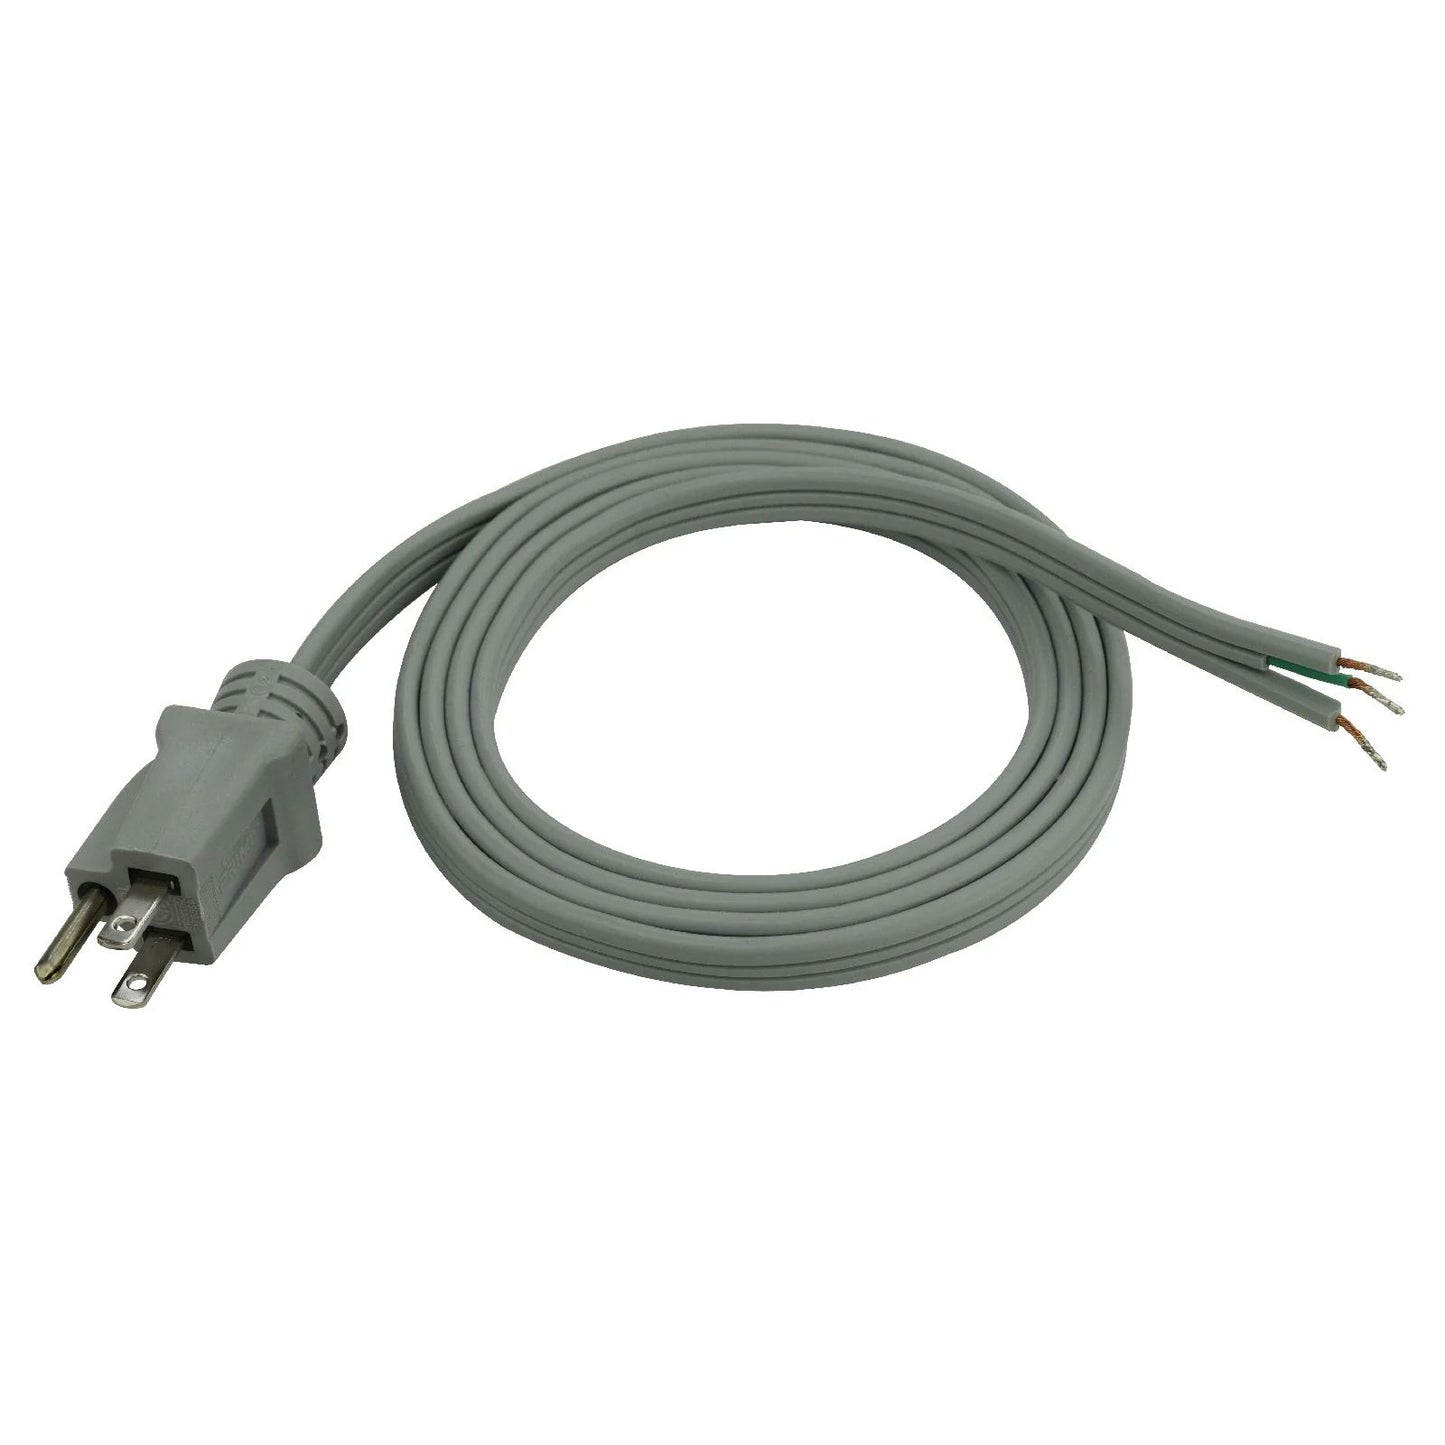 PS200606 - Power Supply Cord Pigtail with Straight Plug - Gray- 6 Ft